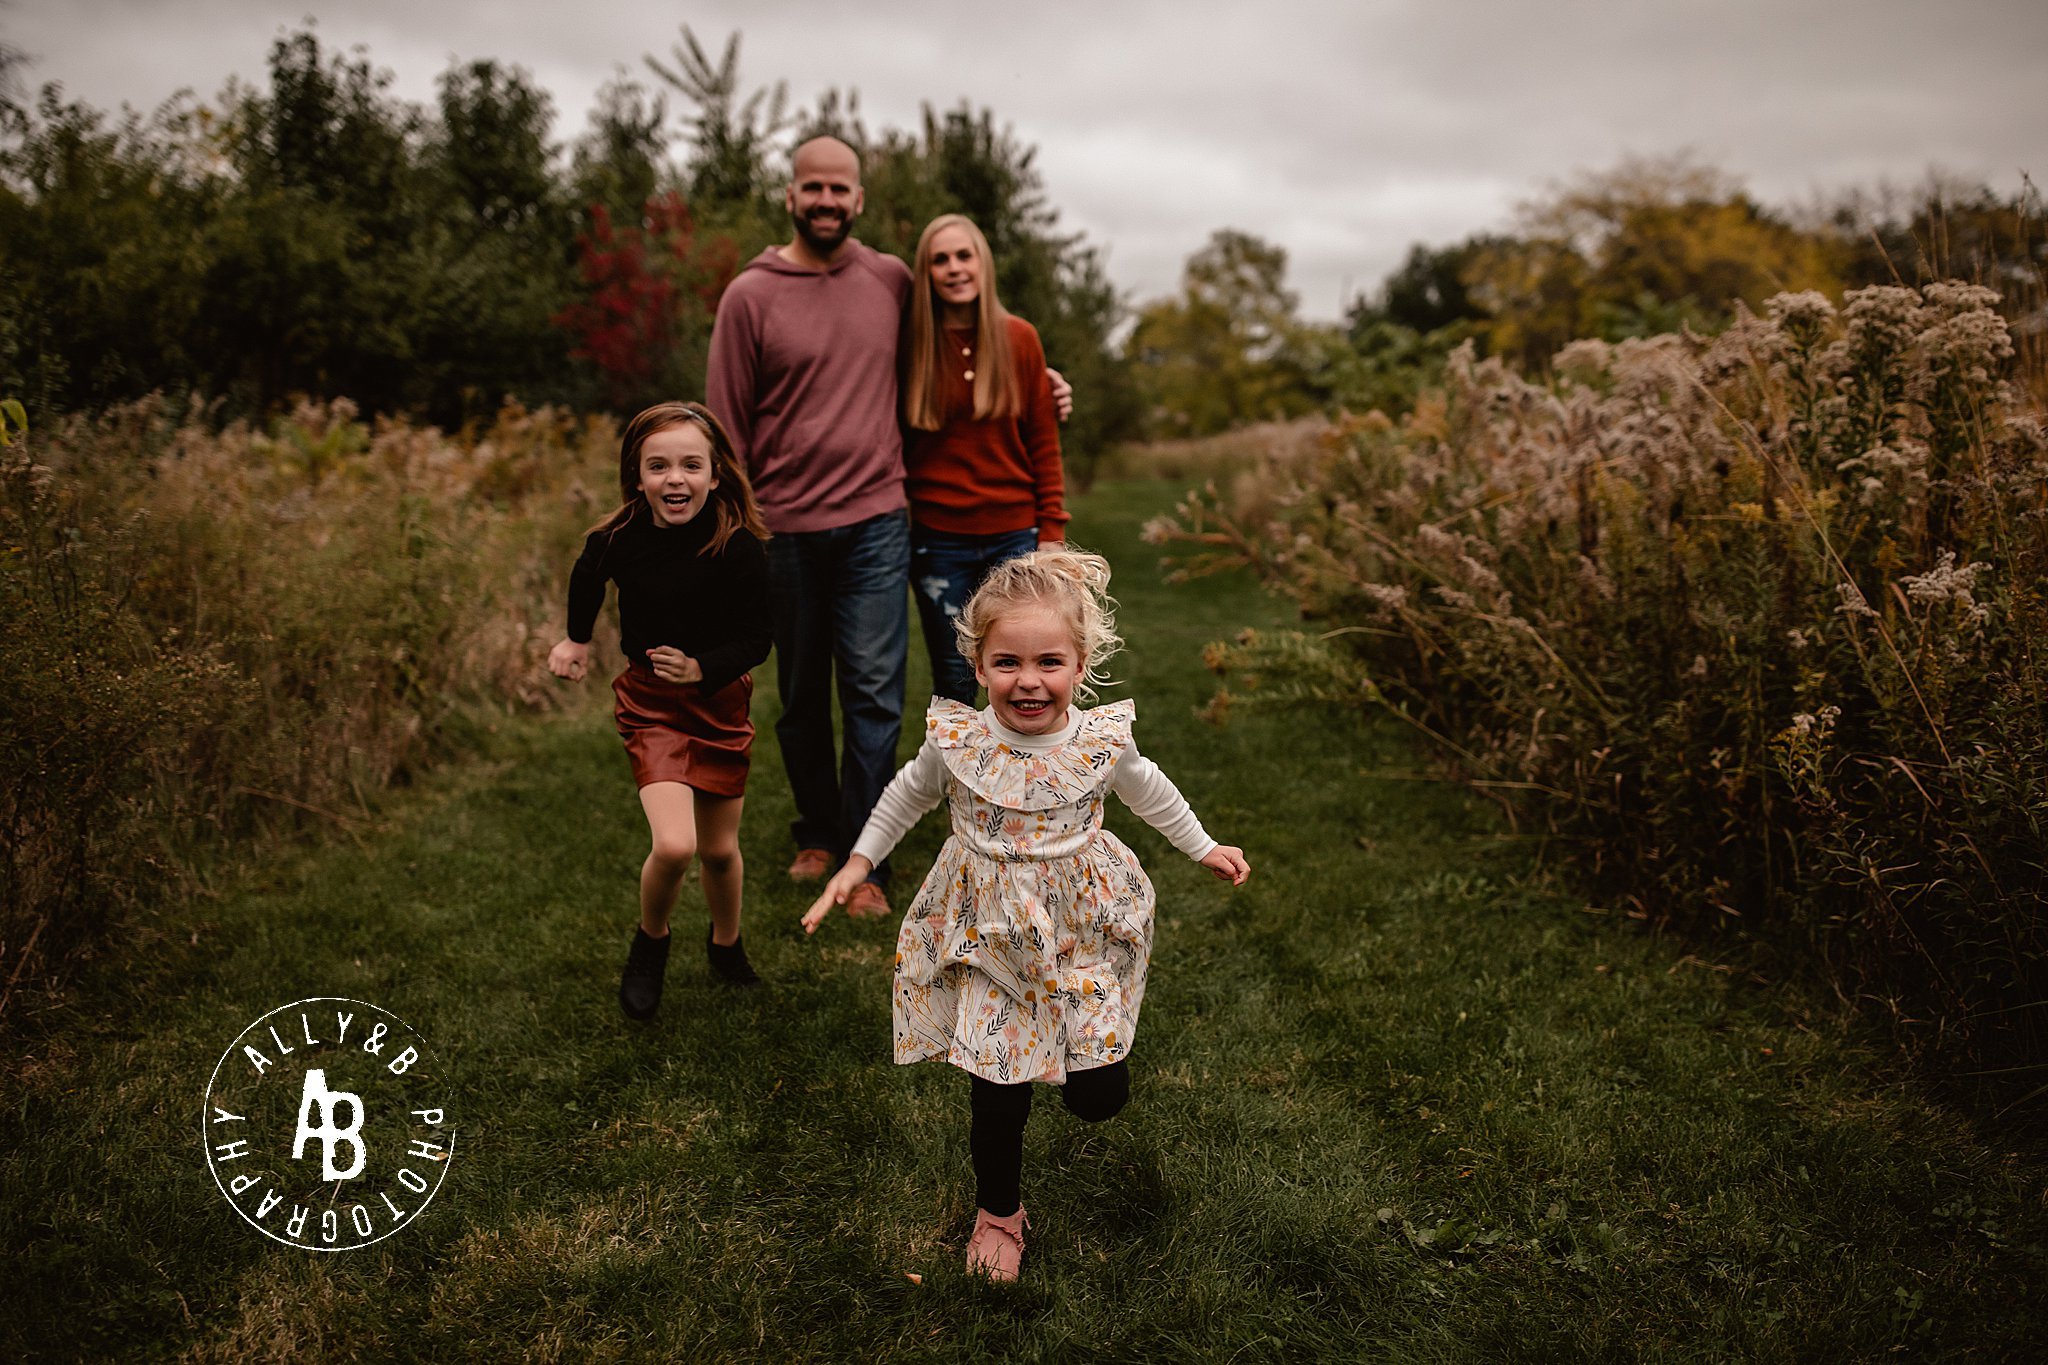 family photographers in naperville il.jpg